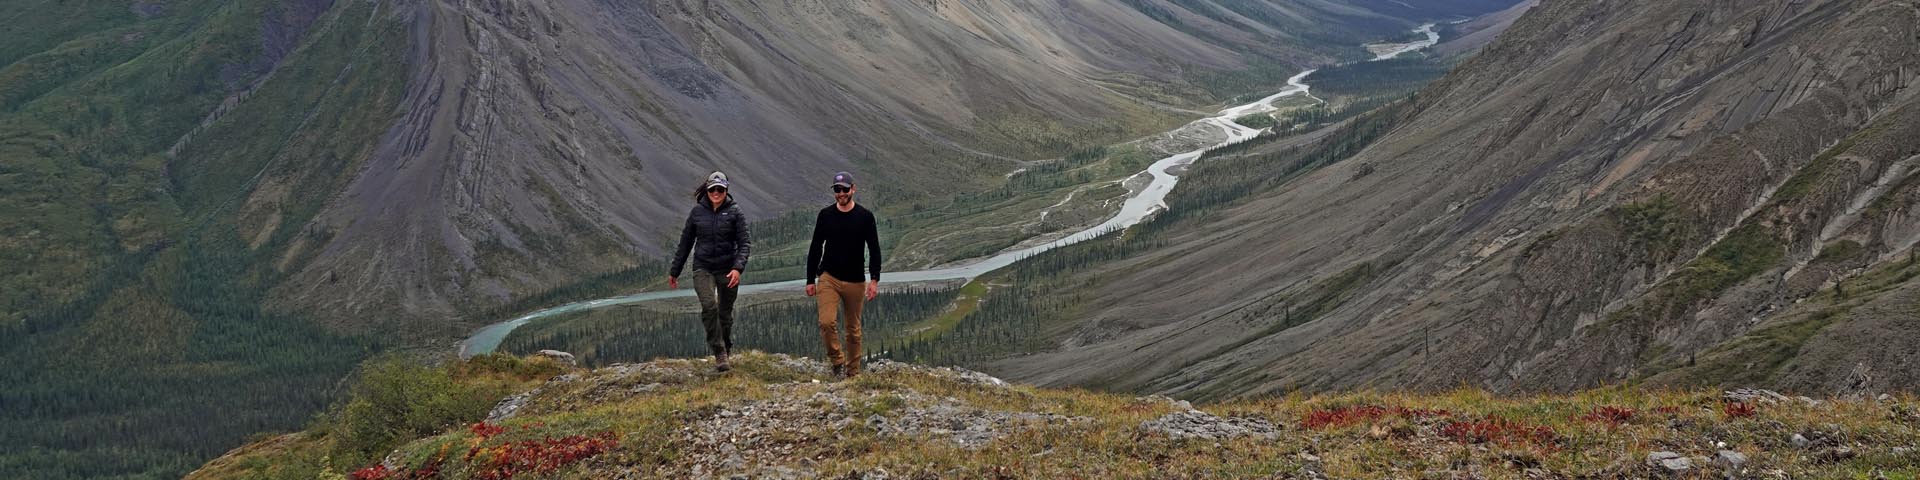 A woman and a man laugh and walk toward the camera, with a view of a river valley and surrounding mountains in the background.